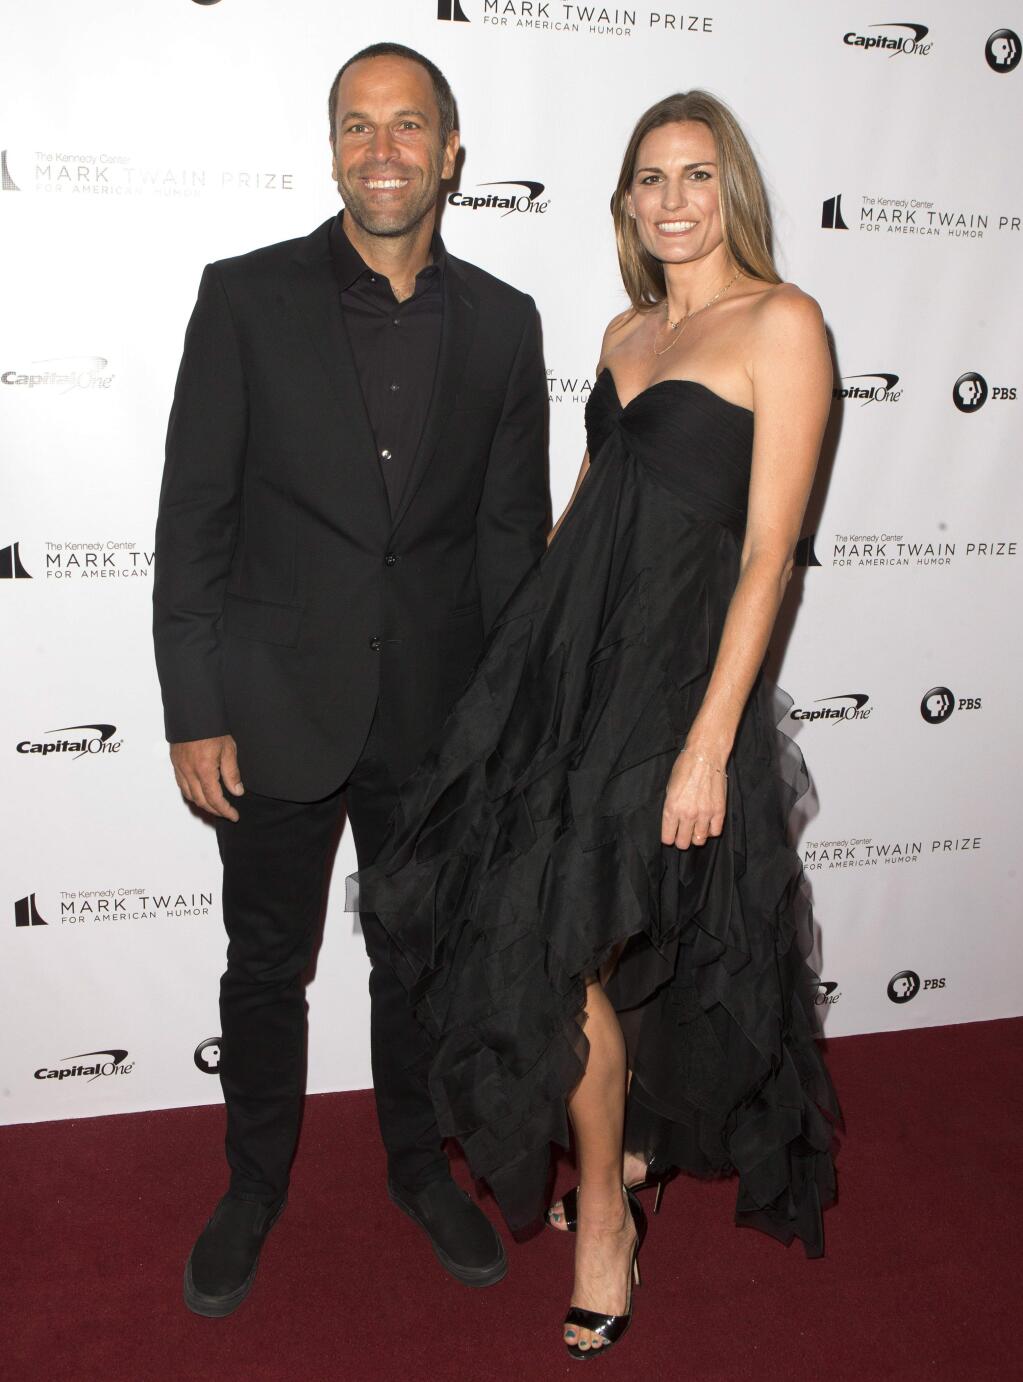 Jack Johnson with his wife Kim arrive at the Kennedy Center for the Performing Arts for the 21st Annual Mark Twain Prize for American Humor presented to Julia Louis-Dreyfus on Sunday, Oct. 21, 2018, in Washington, D.C. (Photo by Owen Sweeney/Invision/AP)